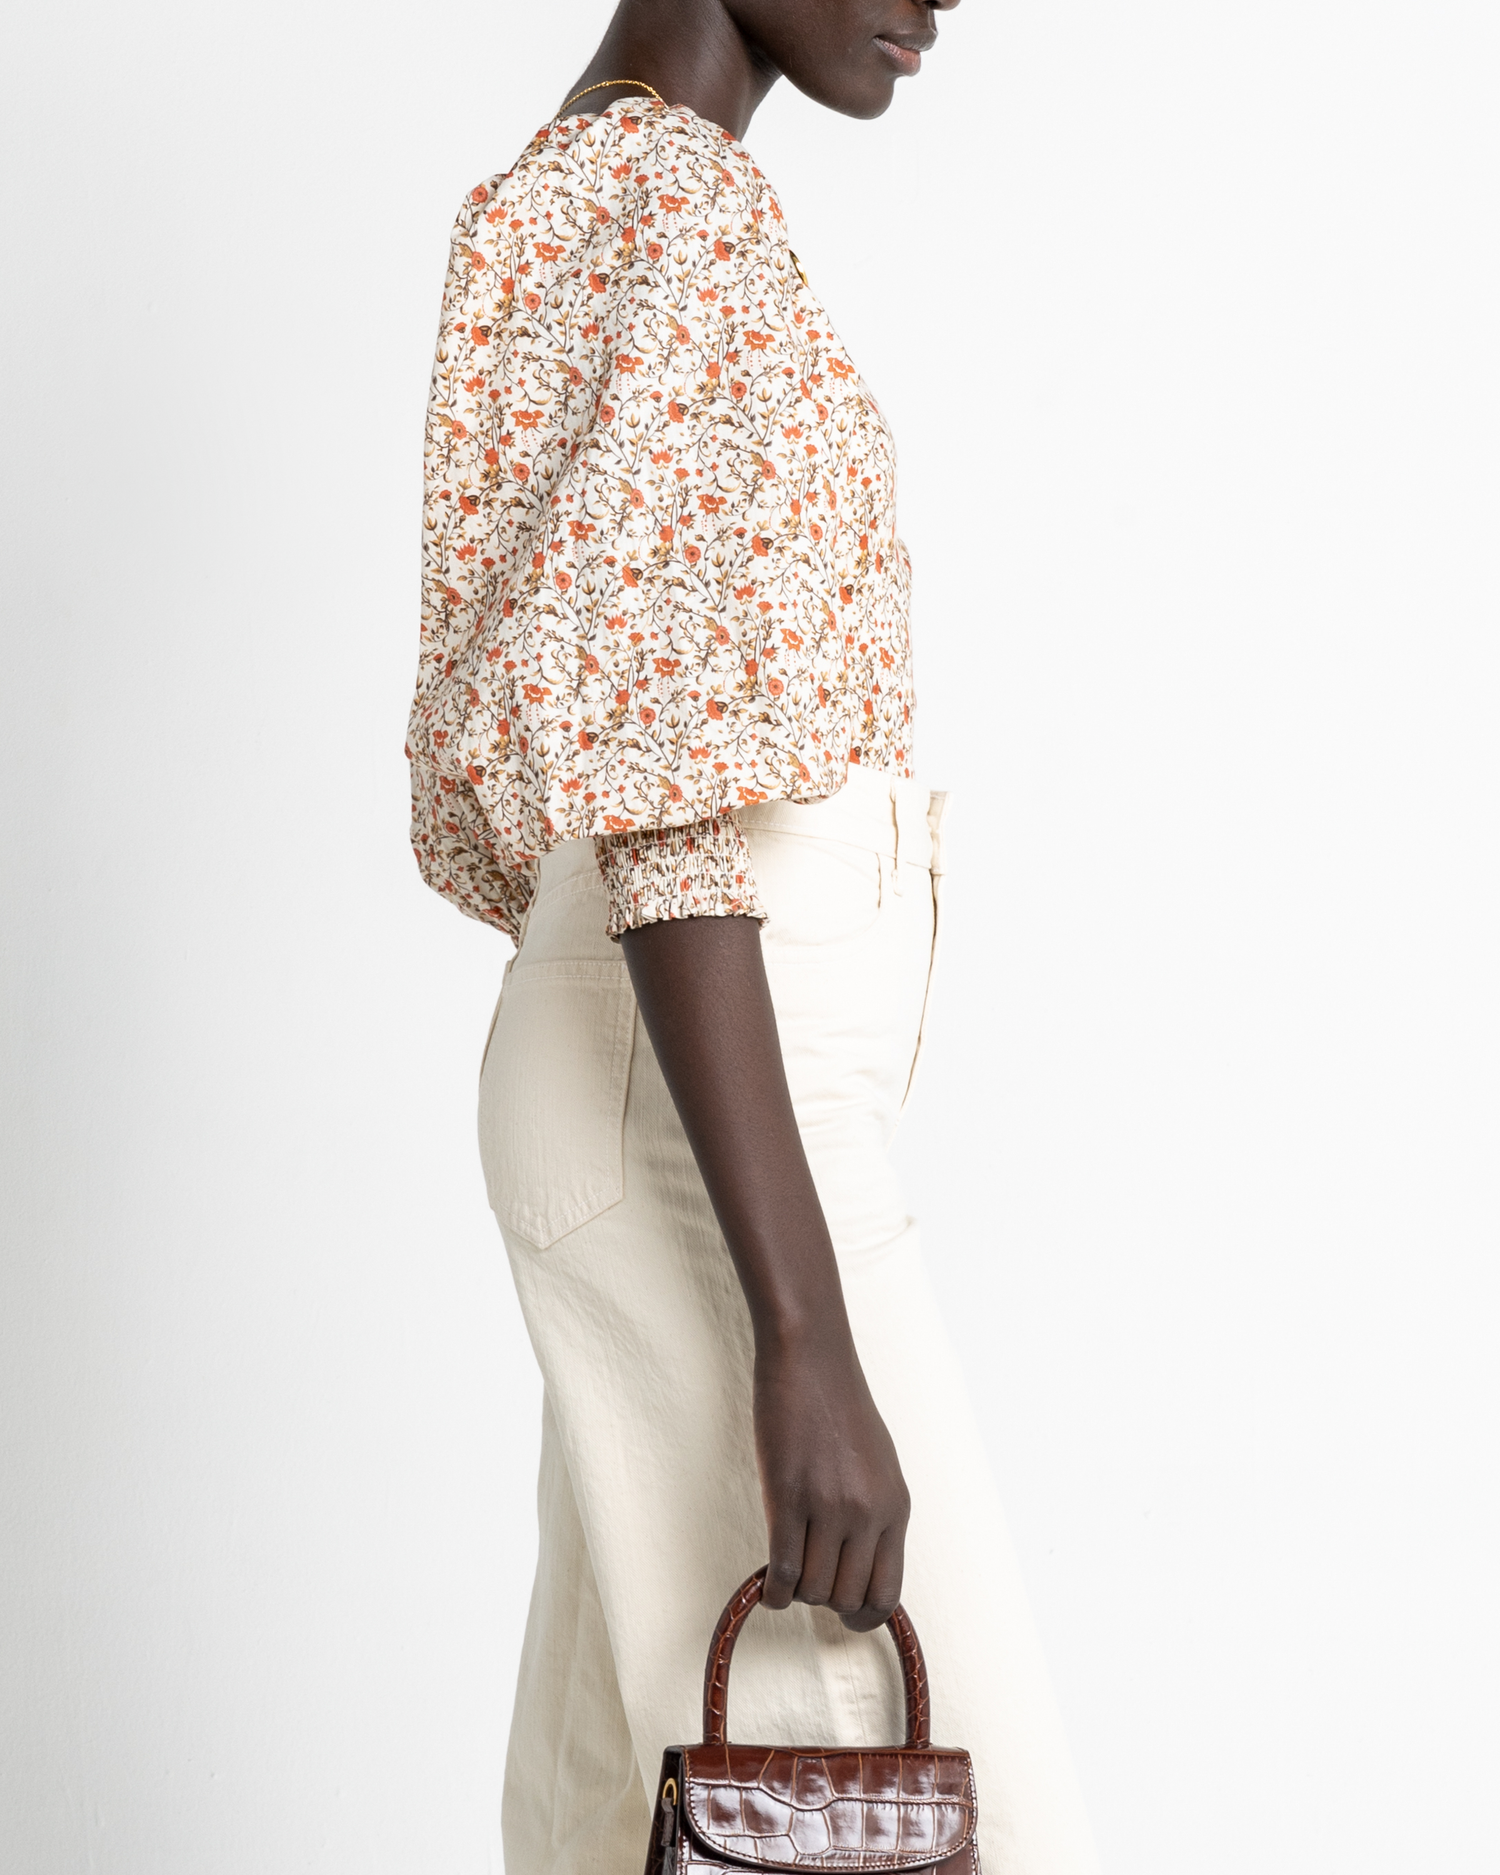 Third image of Gisele Top, a floral puff sleeve top, square neckline, puff sleeves, long sleeve